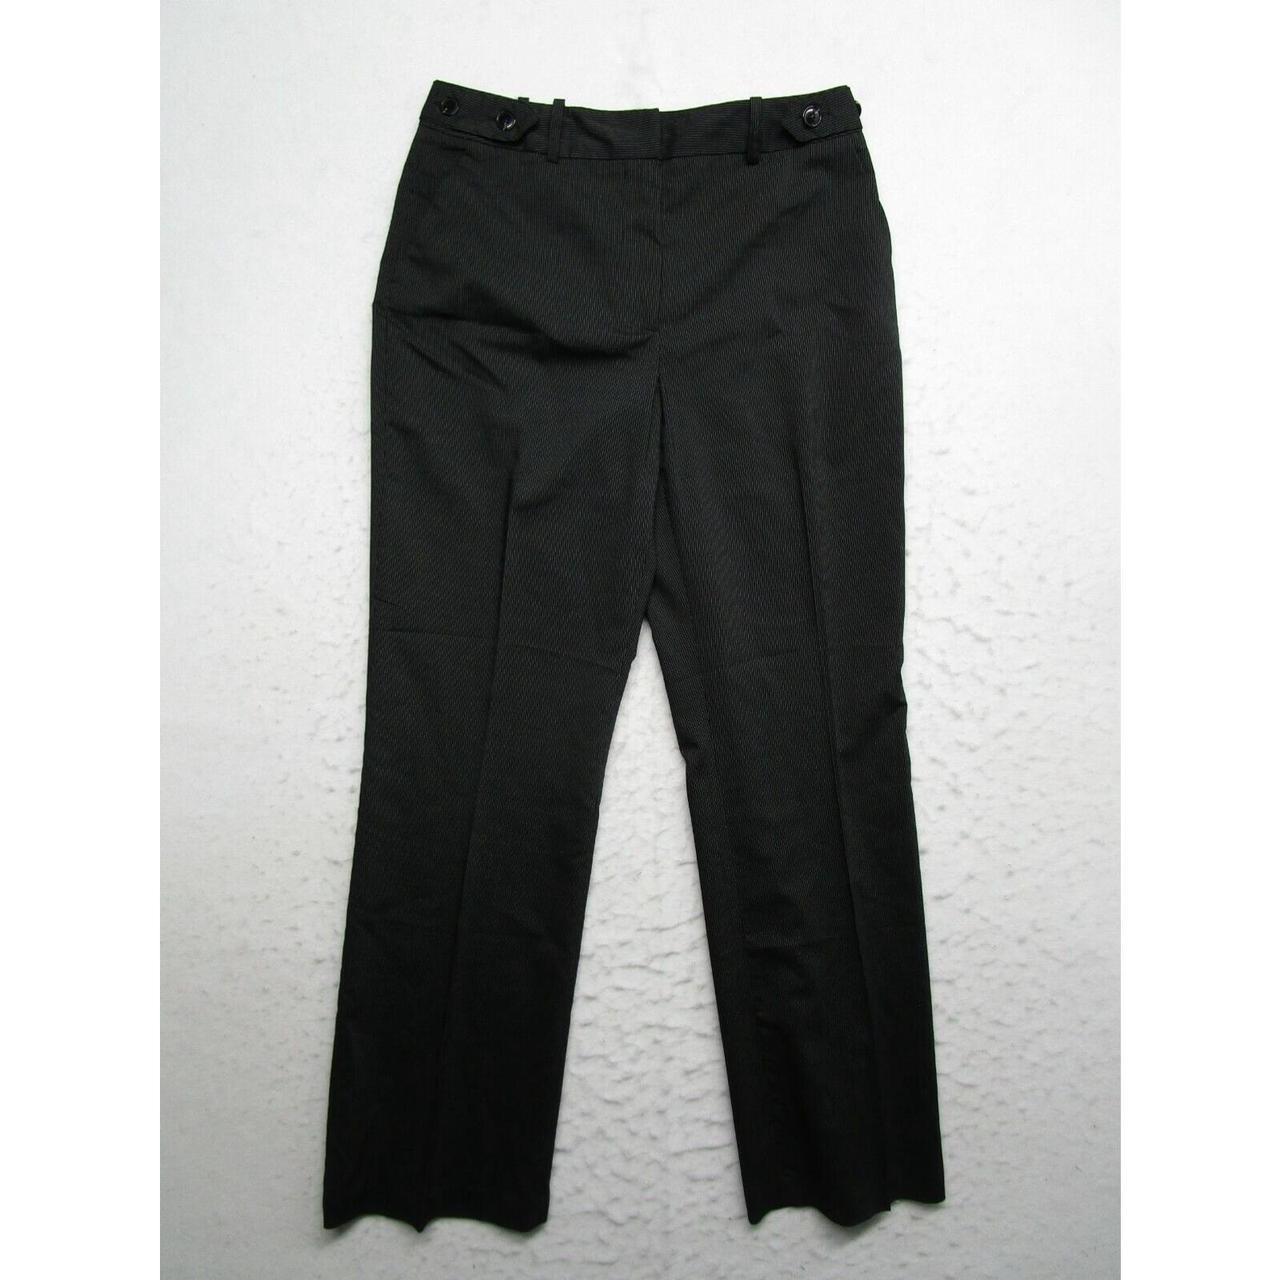 Product Image 1 - NEW East 5th Dress Pants